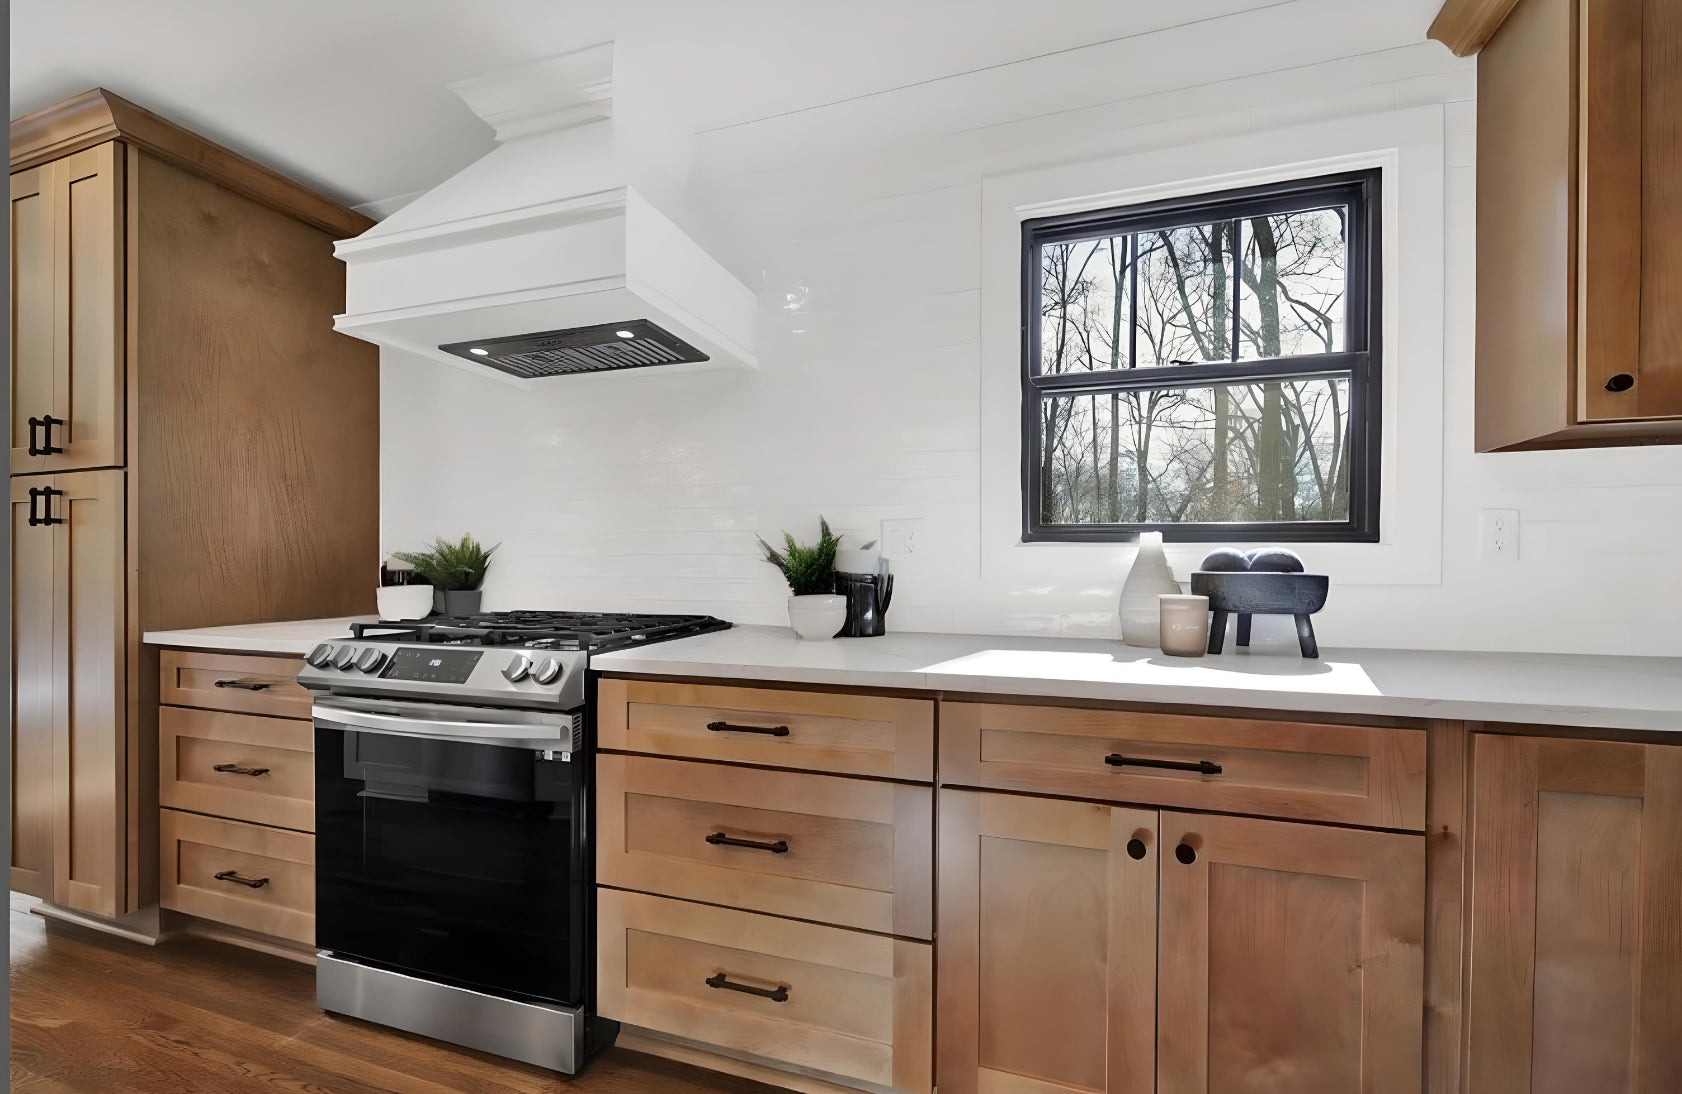 Top Kitchen Remodeling Tips with L&C Cabinetry: Transform Your Space into a Culinary Oasis